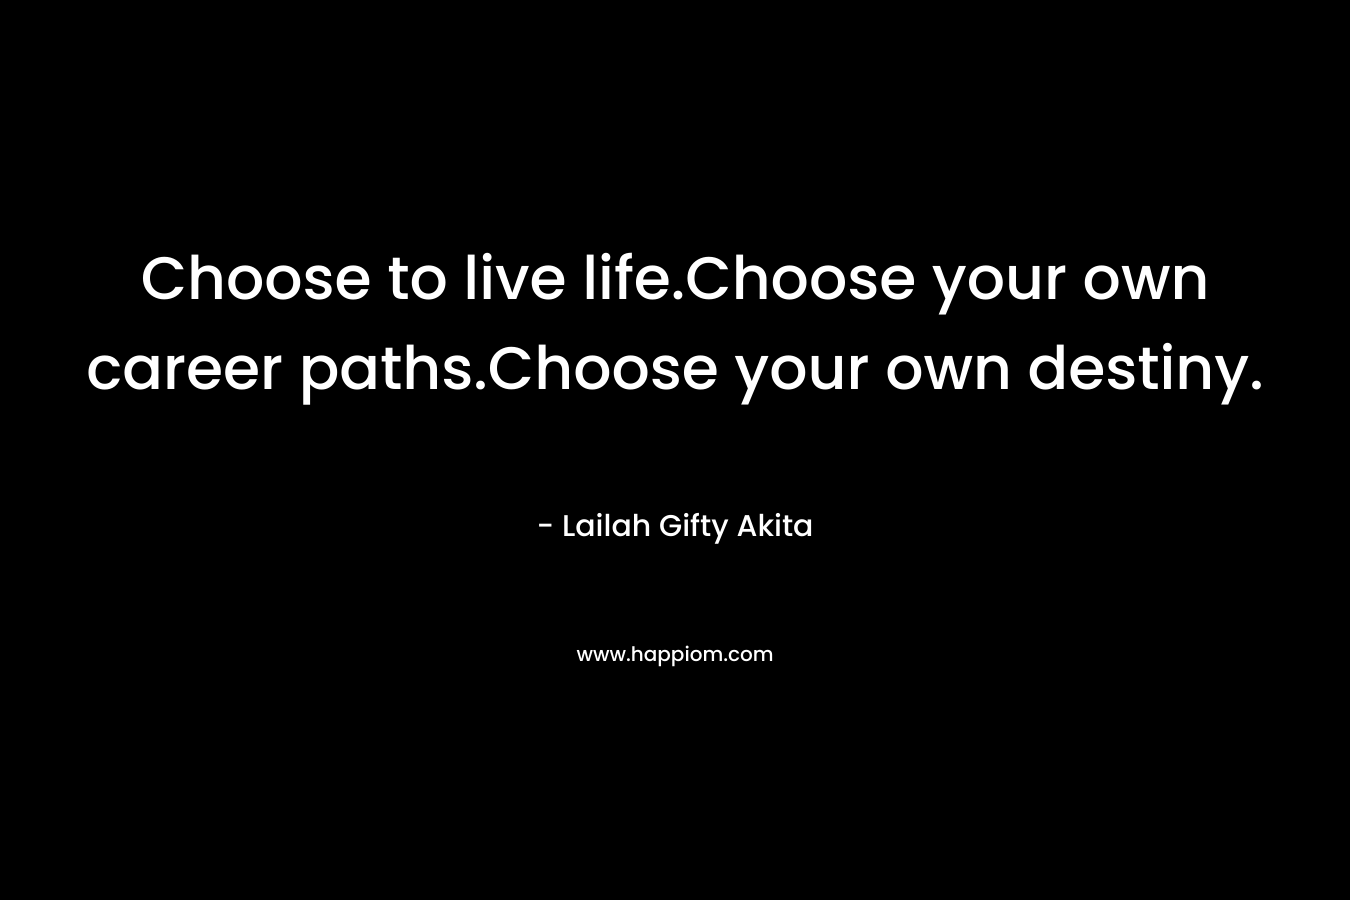 Choose to live life.Choose your own career paths.Choose your own destiny.